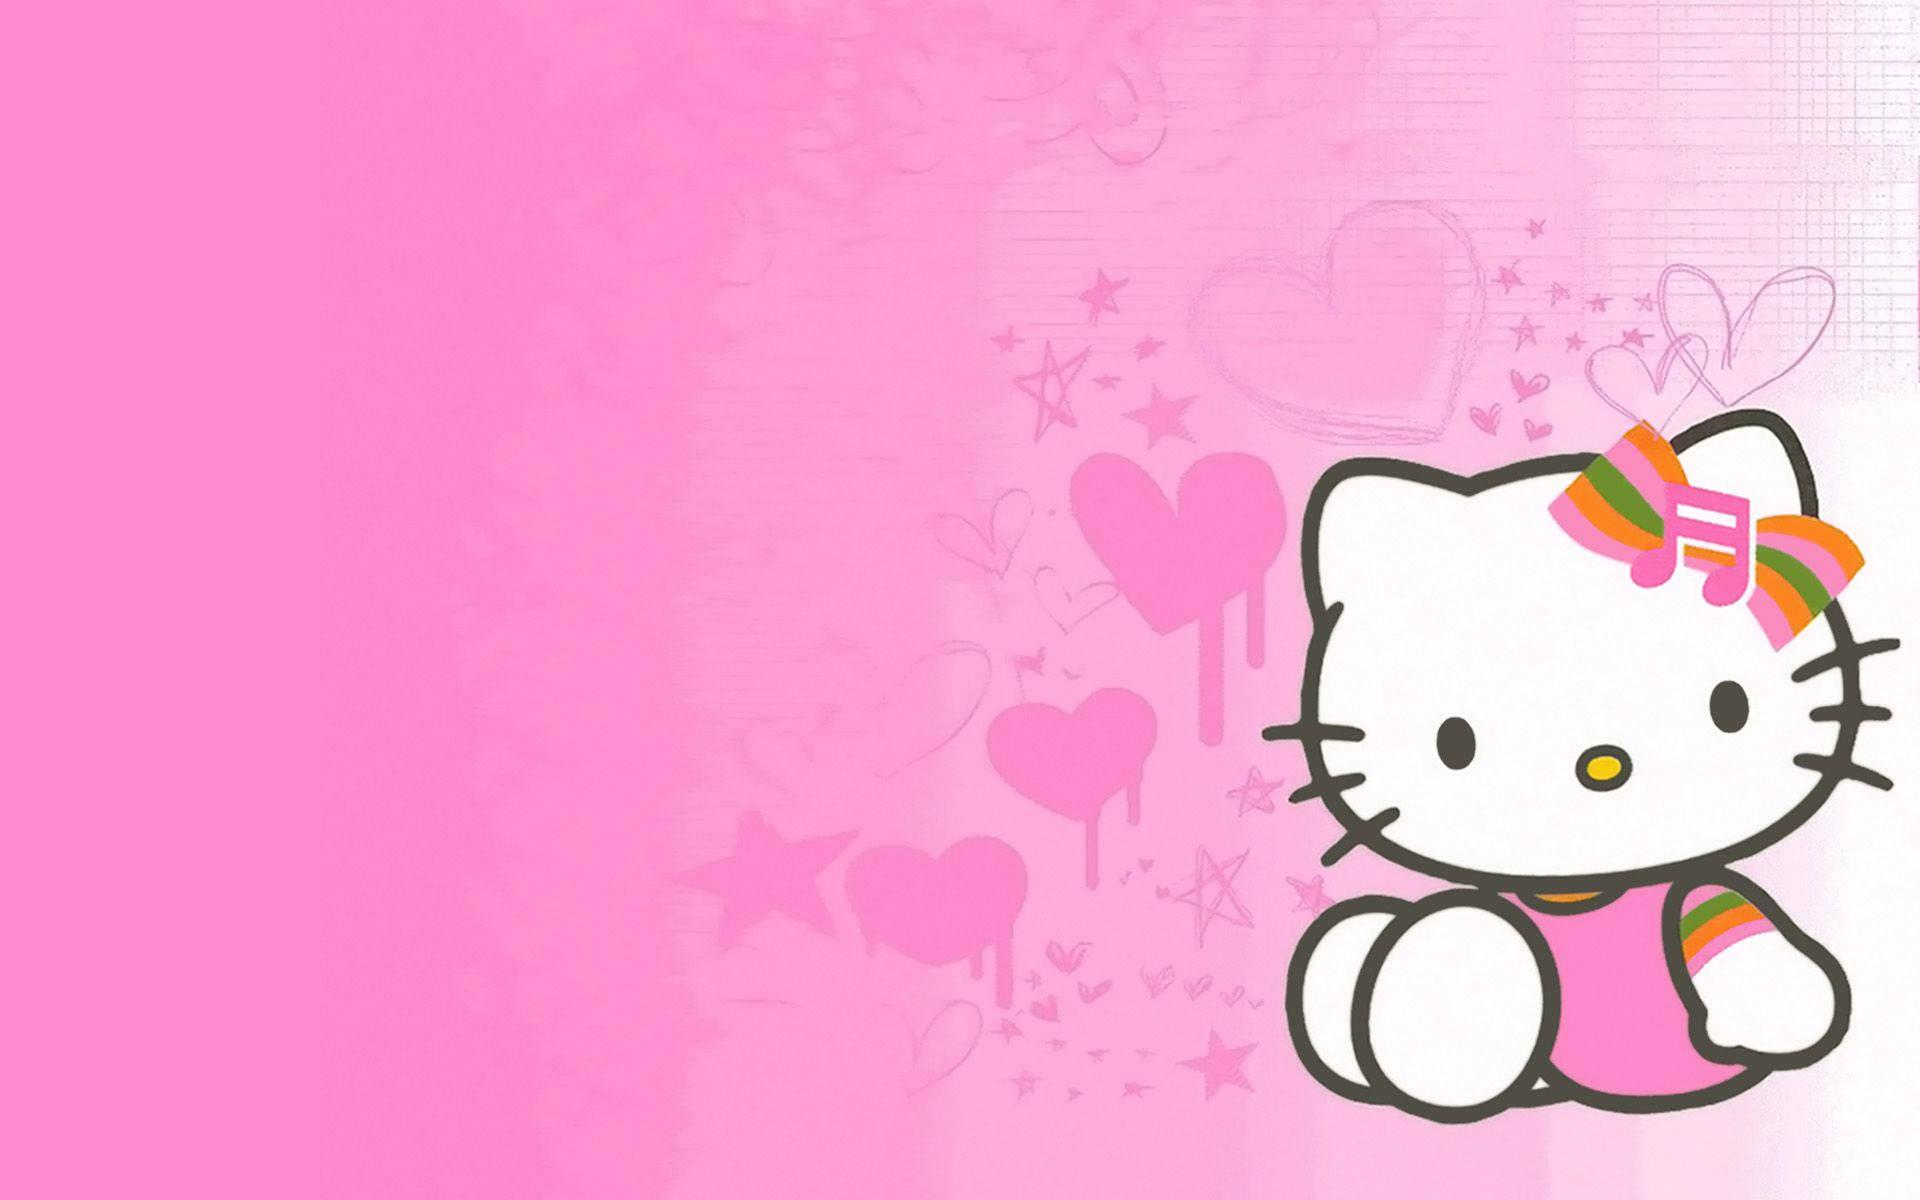 Red Hello Kitty Wallpapers Wallpaper 19201040 Hello Kitty Images Wallpapers  38   Hello kitty wallpaper hd Hello kitty wallpaper Hello kitty iphone  wallpaper